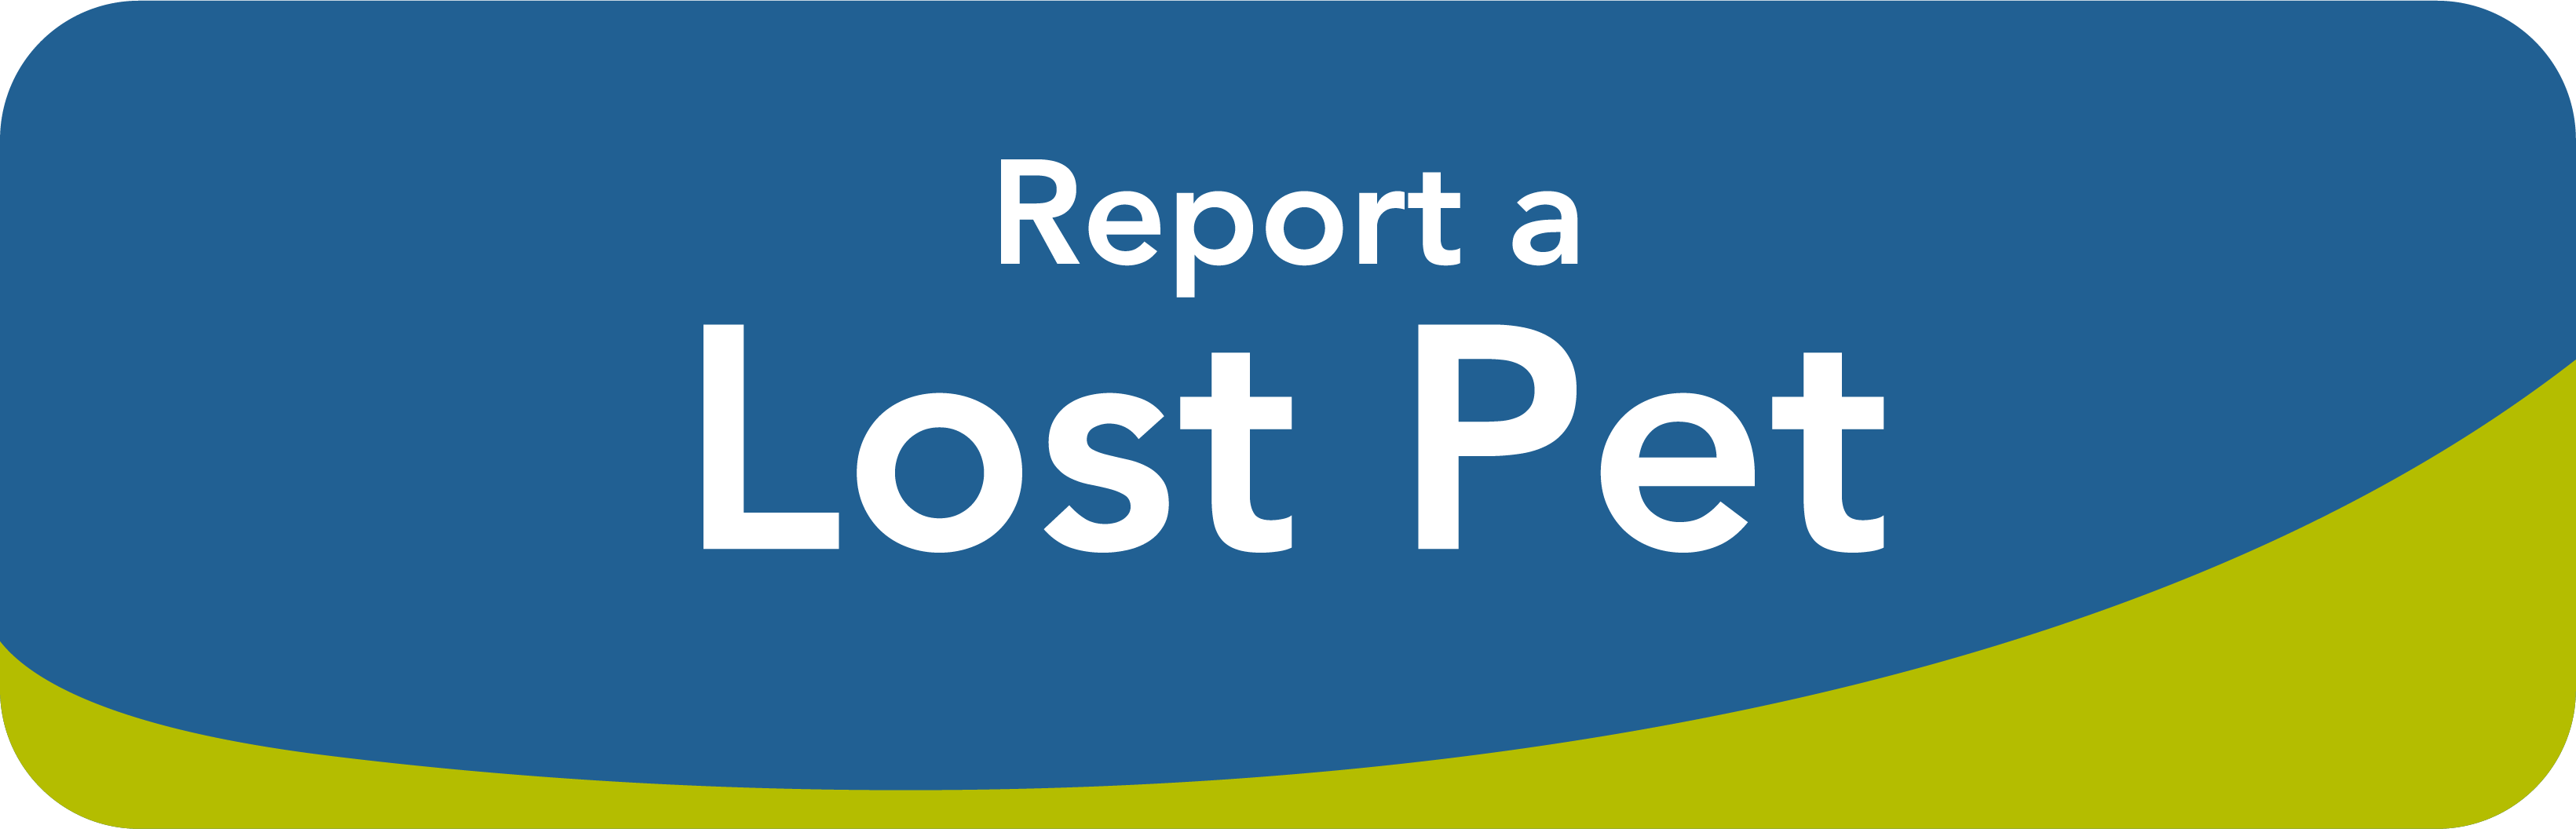 Report a Lost Pet Button Image.png